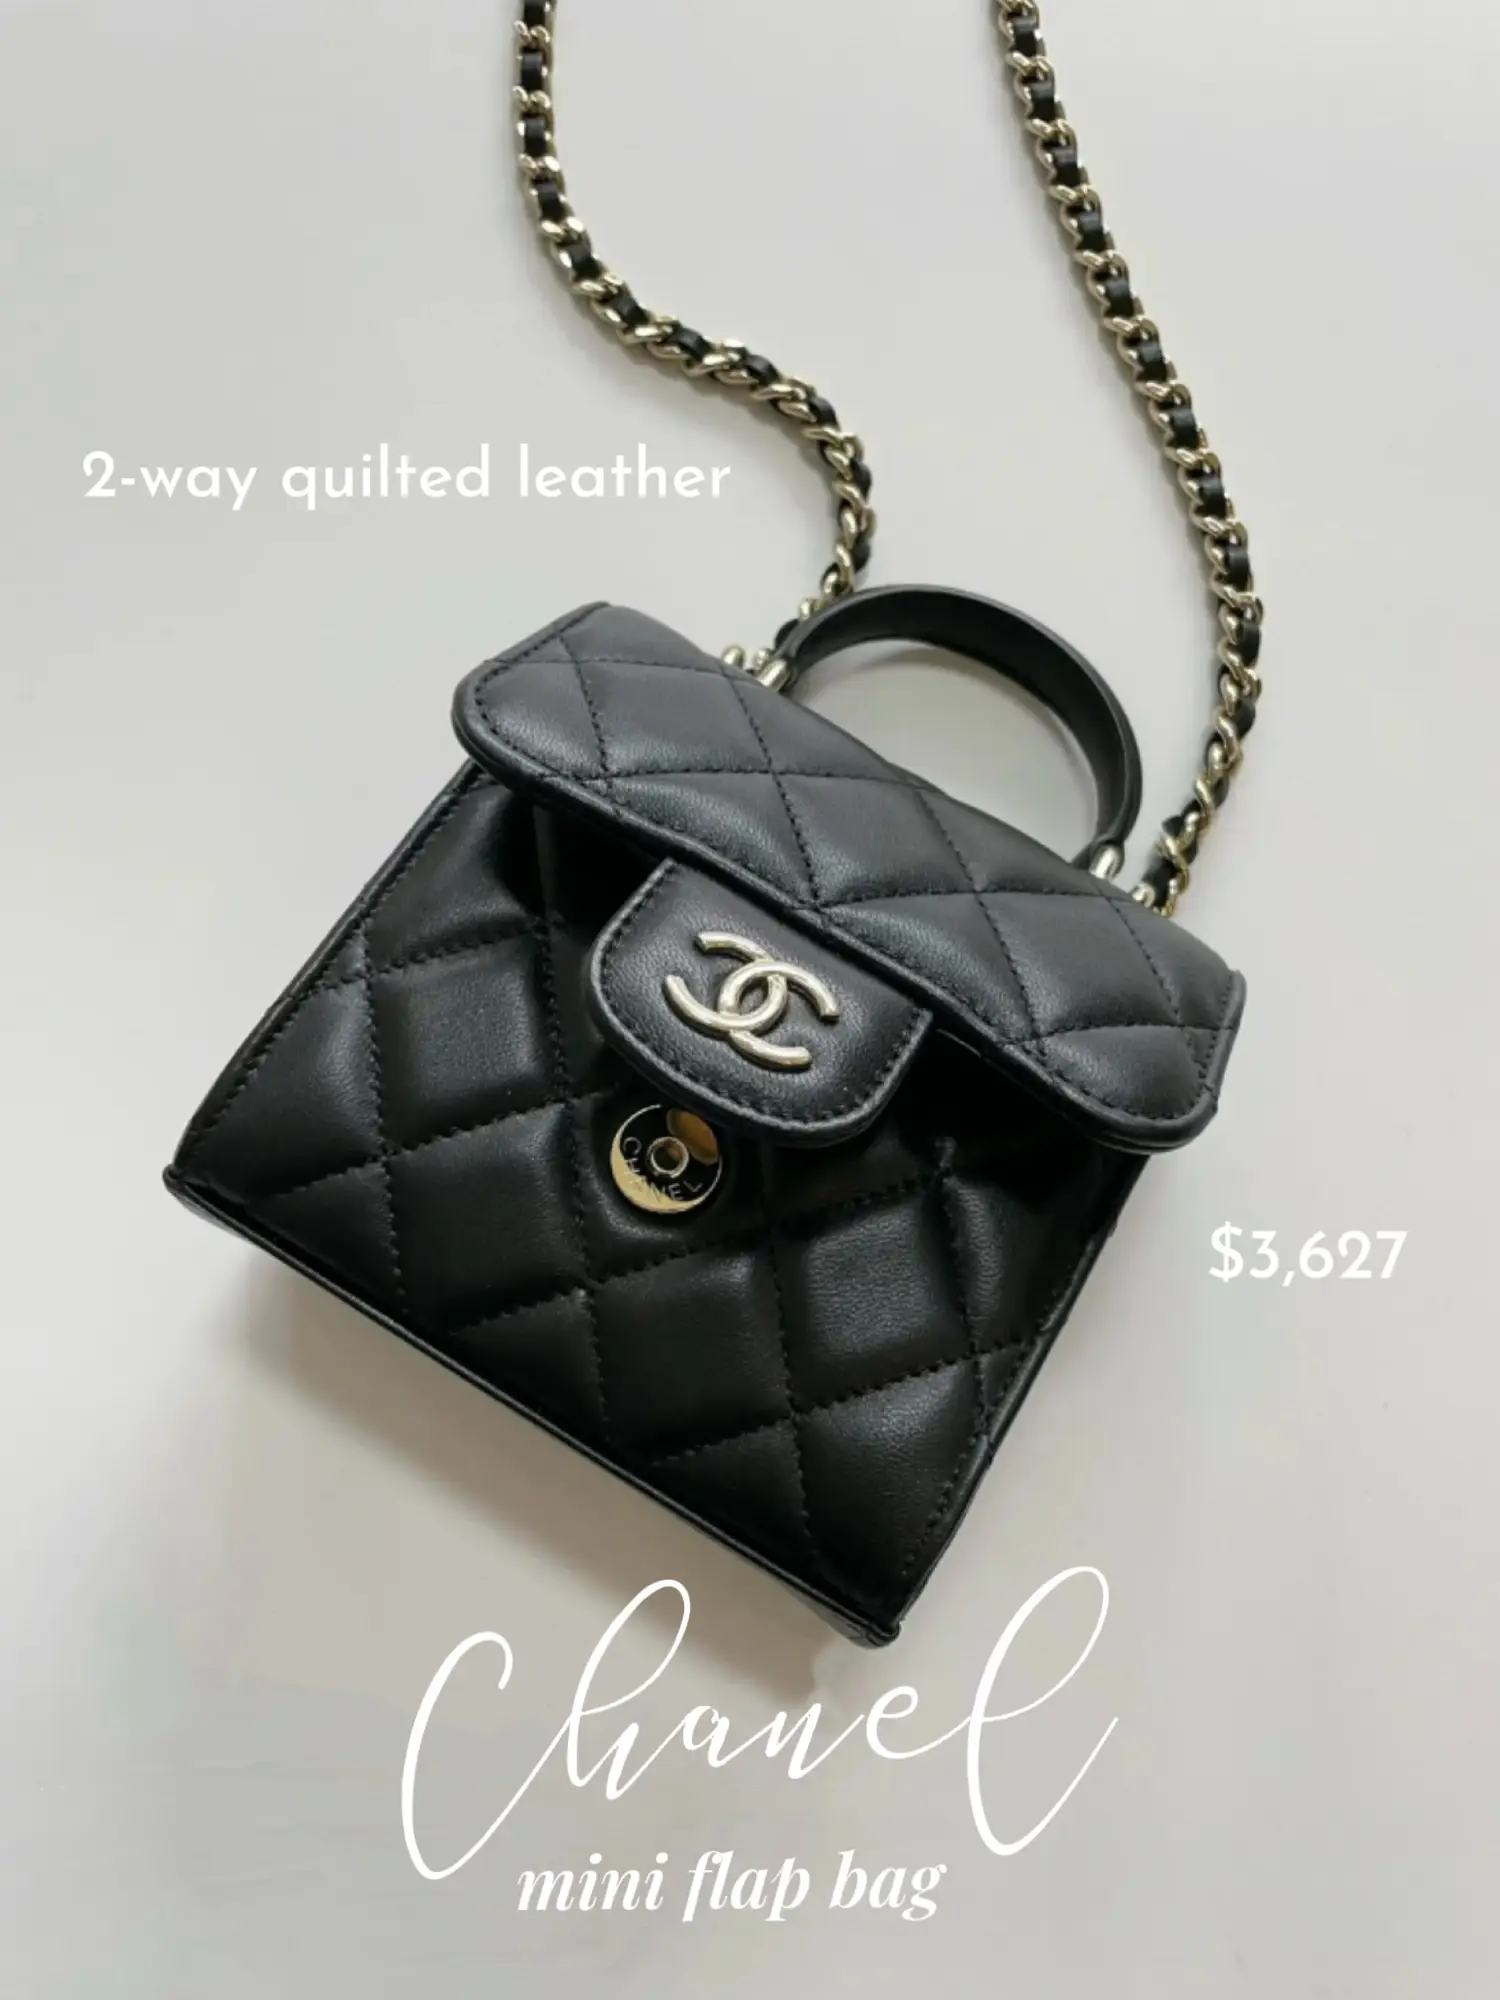 Top 4 black bags (Chanel Edition)